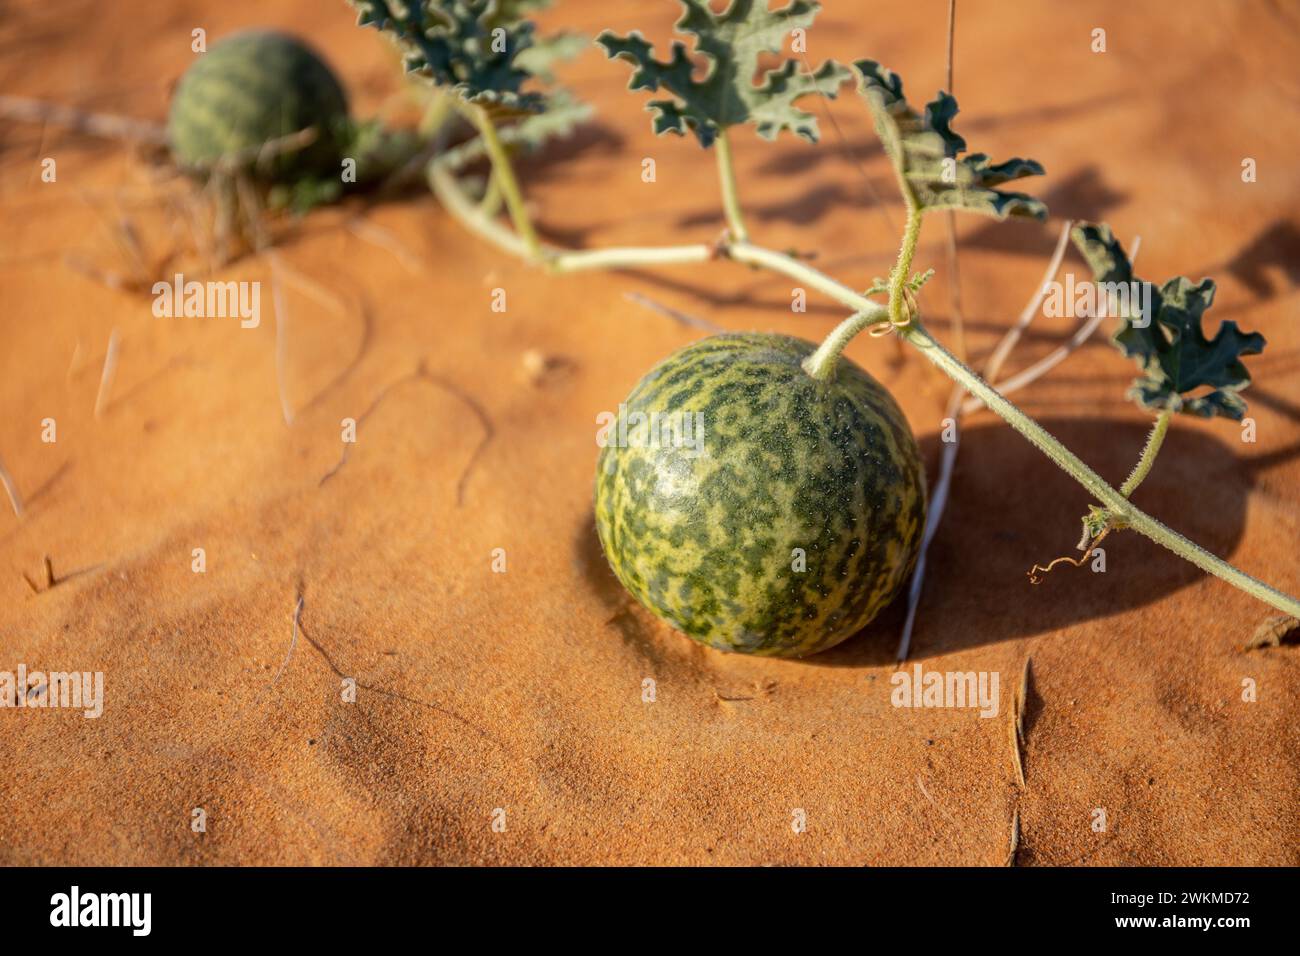 Citrullus colocynthis (colocynth, bitter melon) ripe fruit with stems and leaves close-up view, growing on a sand dune, in the desert of UAE. Stock Photo